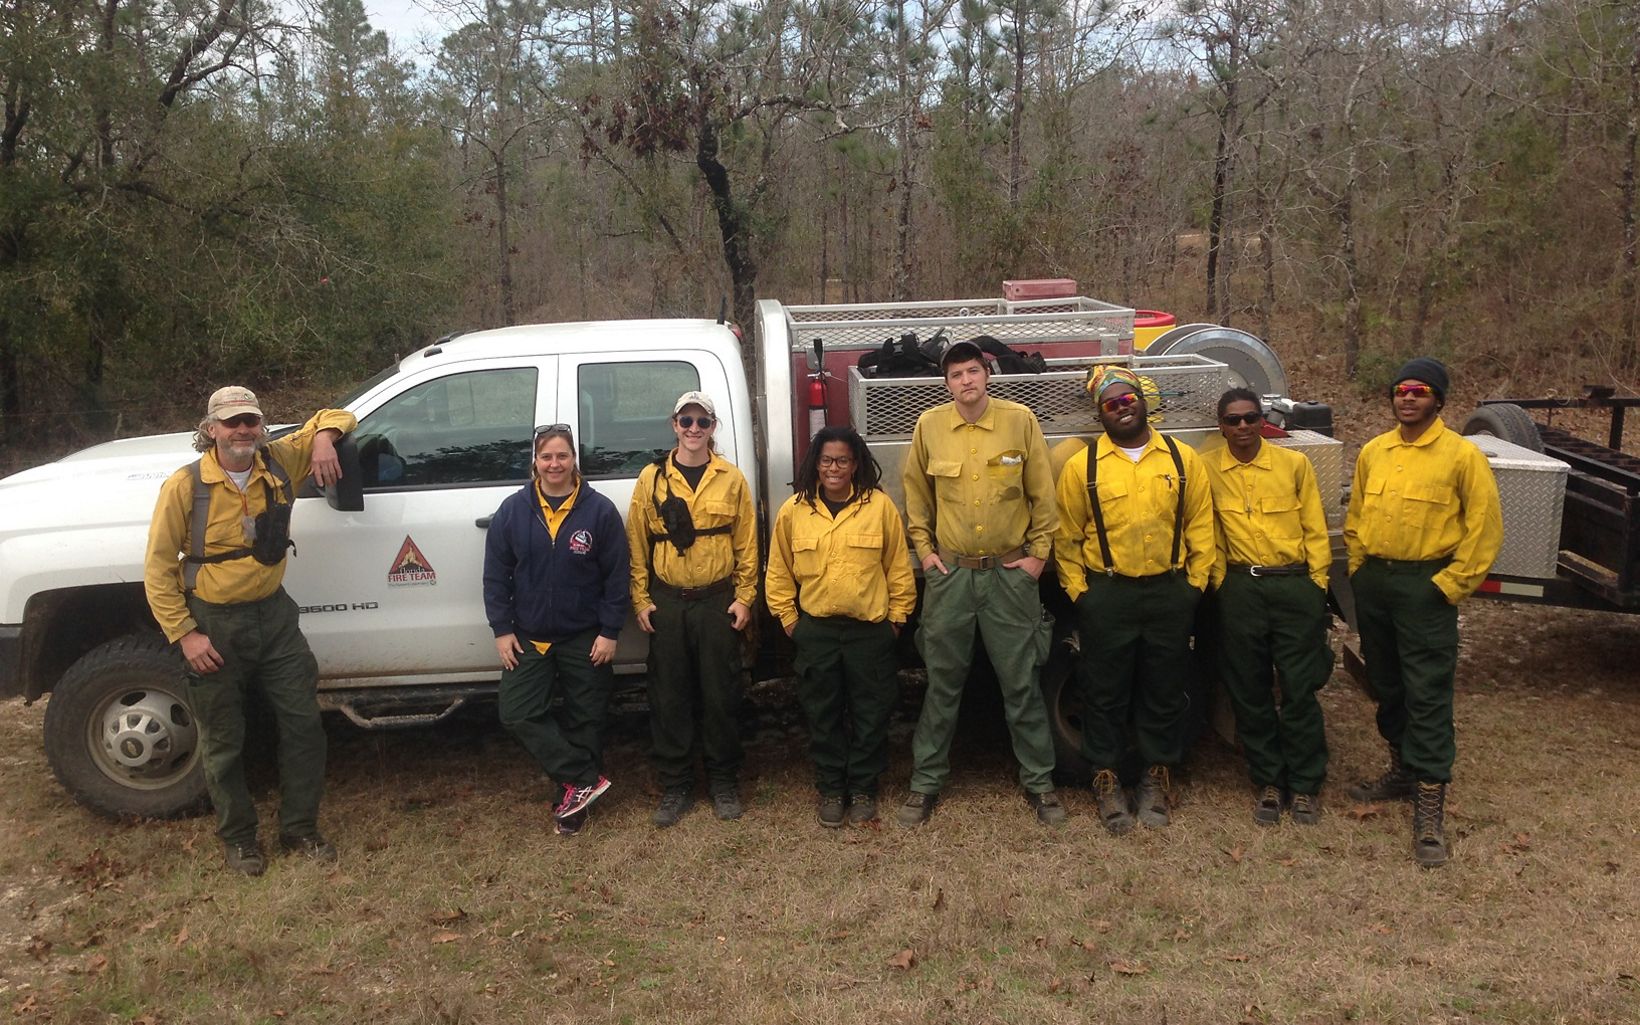 On the Firelines Staff conduct a prescribed burn to ensure healthy habitat for native plants and animals in the longleaf pine flatwoods at Apalachicola Bluffs and Ravines Preserve. © Brian Pelc/TNC